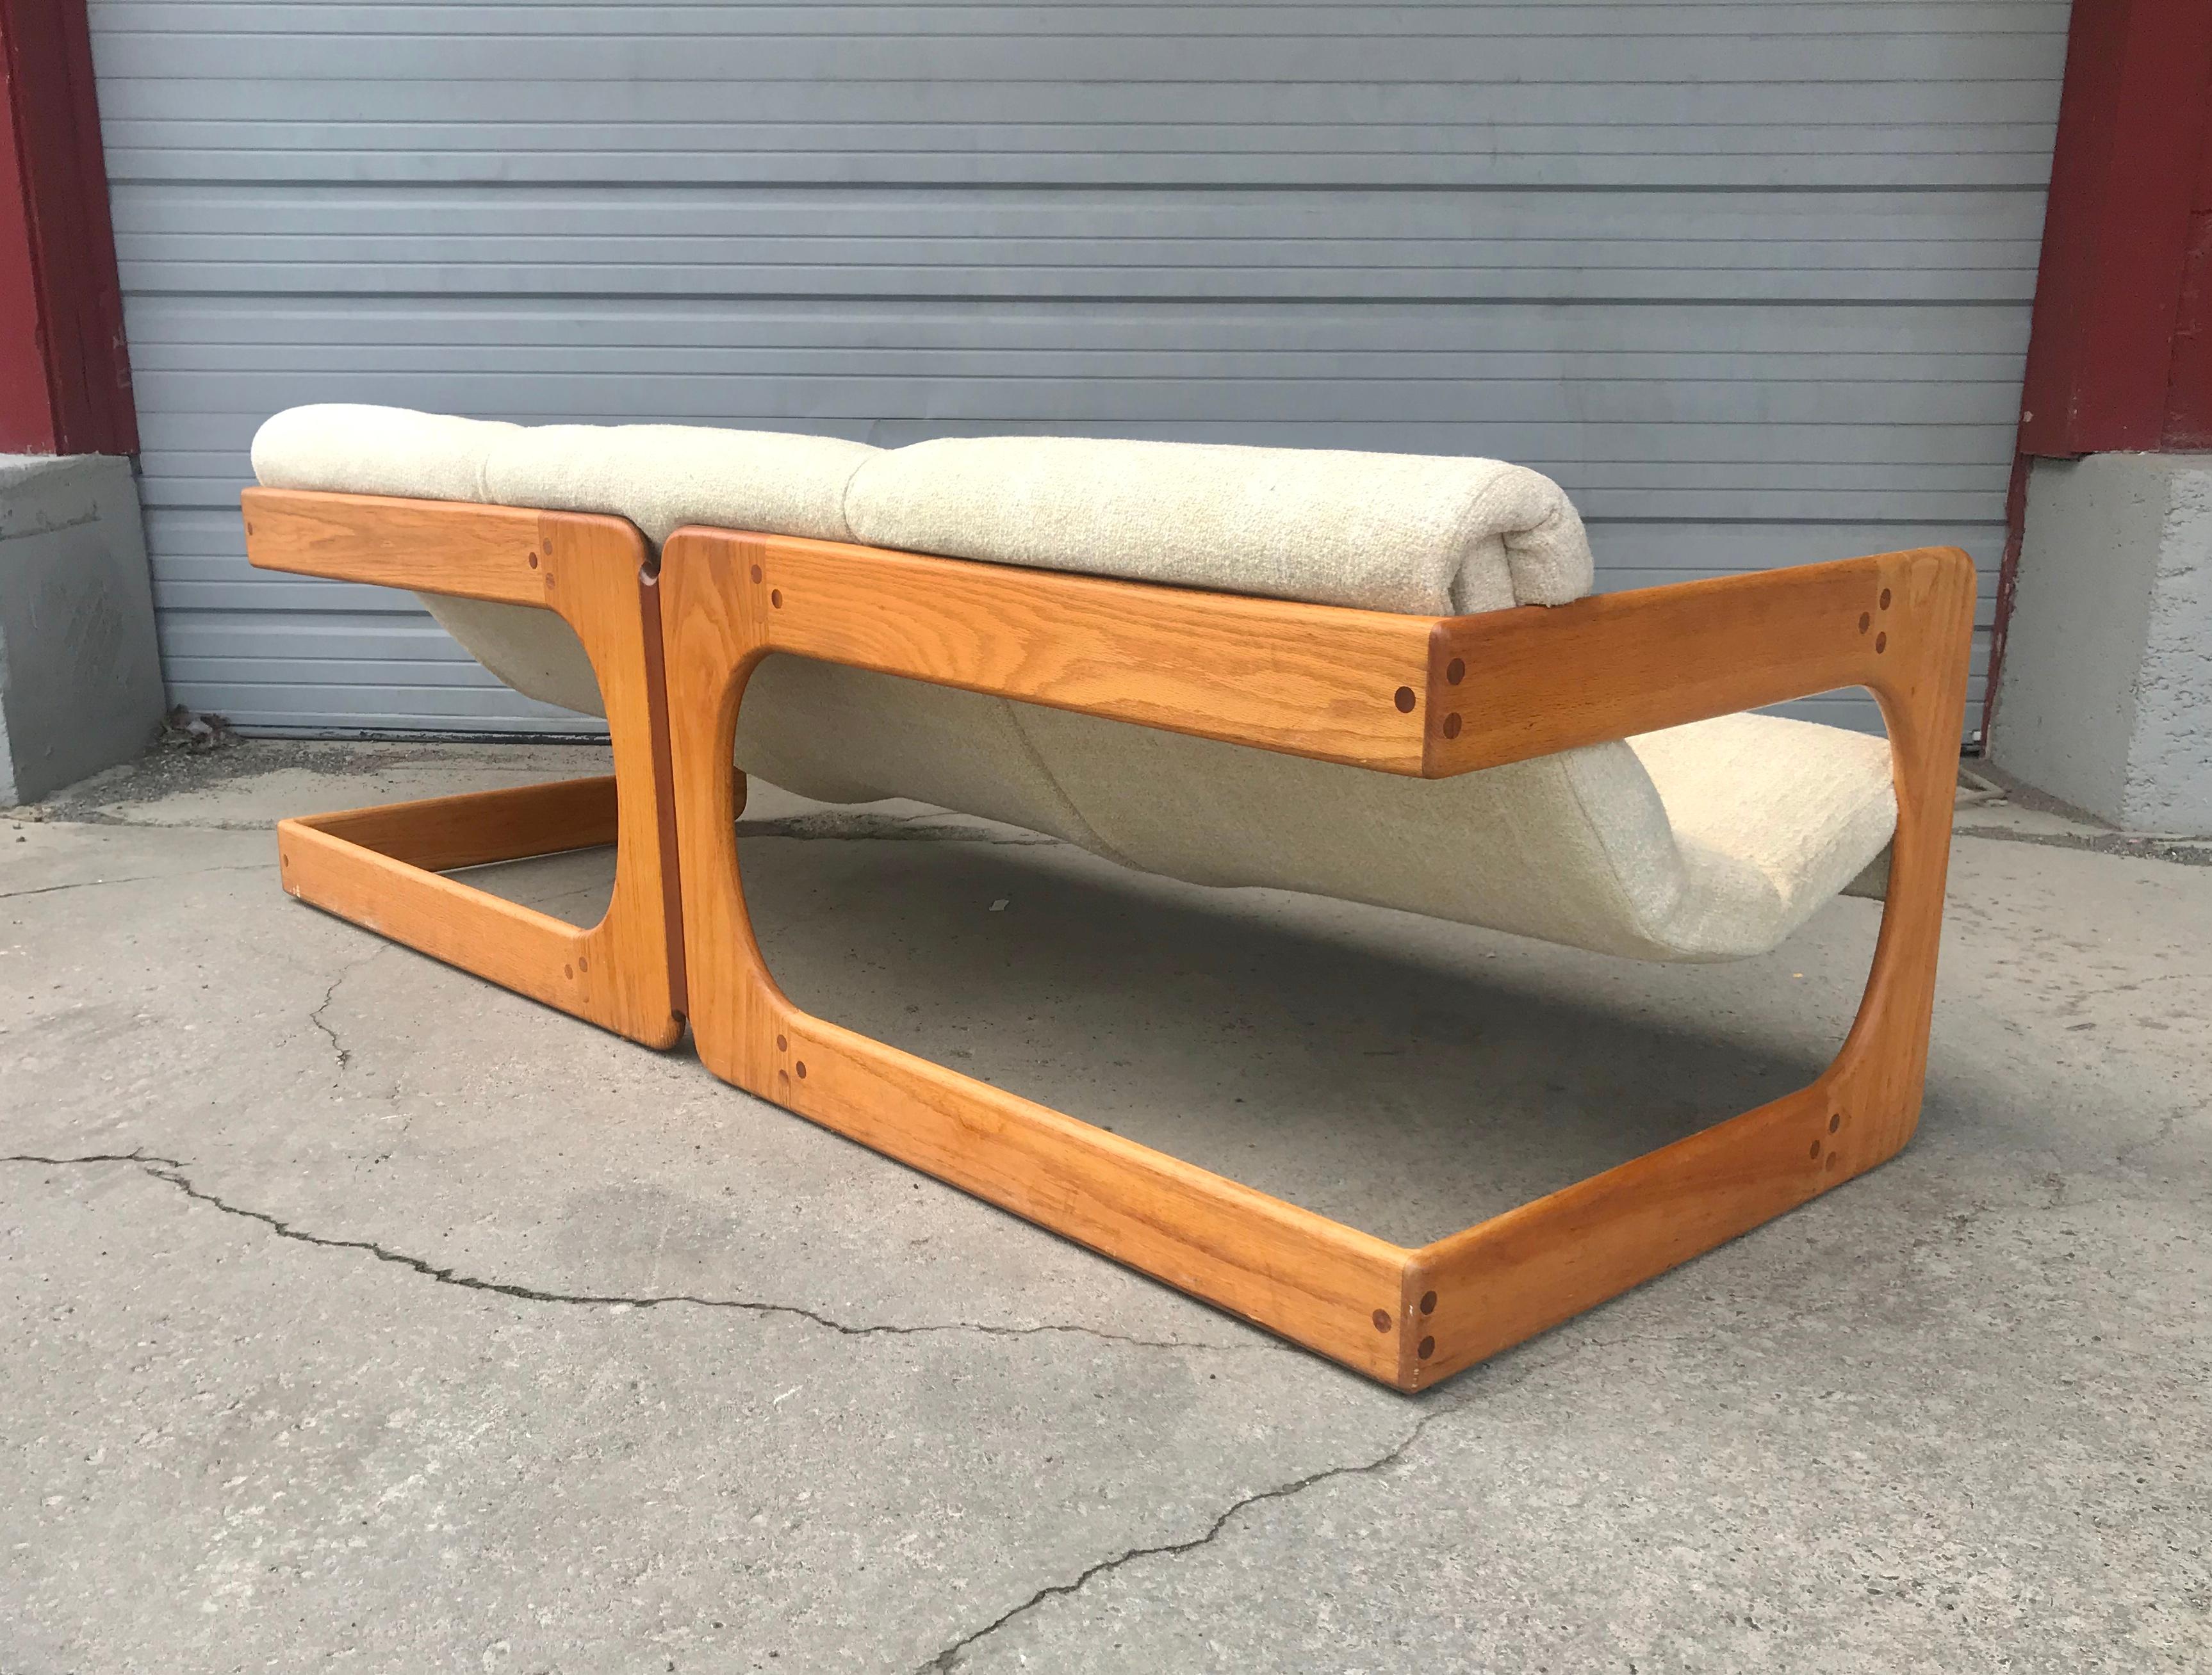 Extremely rare 3-seat sofa designed by Lou Hodges for California Design Group in the 1970s. Cantilever design oak frame features rounded edge, all original condition, retains original fabric in nice useable condition, amazing quality and